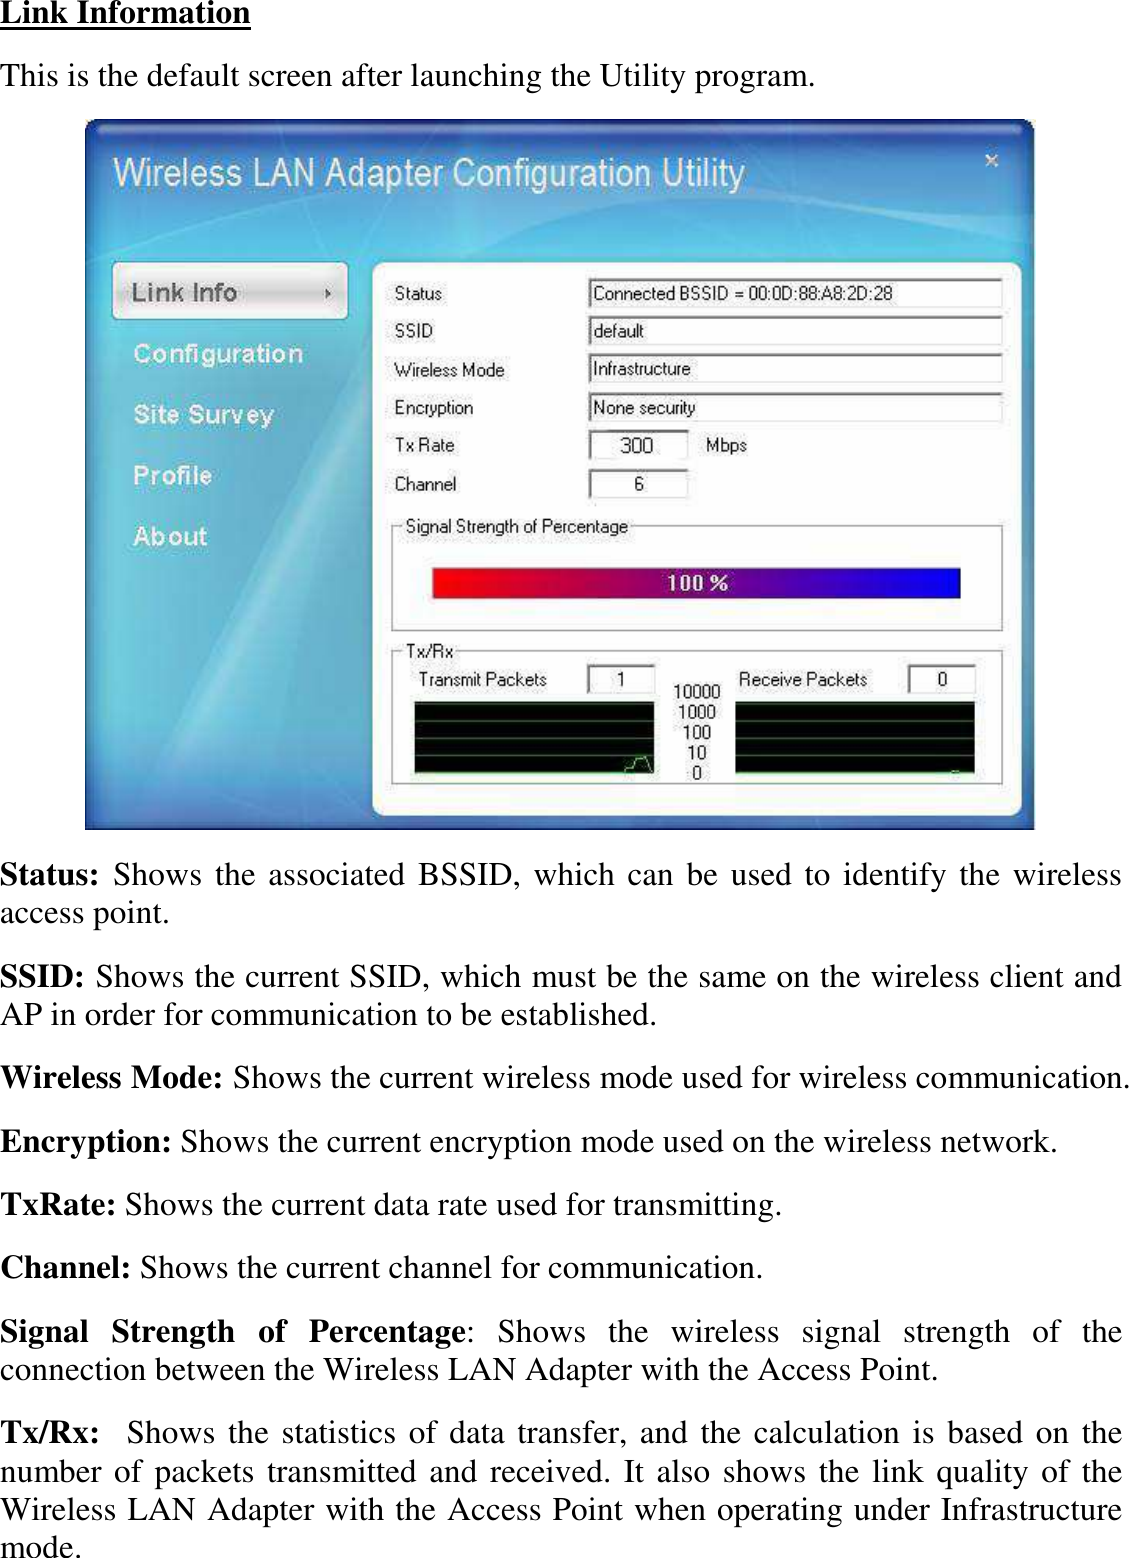  Link Information This is the default screen after launching the Utility program.  Status: Shows the associated BSSID, which can be used to identify the wireless access point. SSID: Shows the current SSID, which must be the same on the wireless client and AP in order for communication to be established. Wireless Mode: Shows the current wireless mode used for wireless communication. Encryption: Shows the current encryption mode used on the wireless network. TxRate: Shows the current data rate used for transmitting. Channel: Shows the current channel for communication. Signal  Strength  of  Percentage:  Shows  the  wireless  signal  strength  of  the connection between the Wireless LAN Adapter with the Access Point. Tx/Rx:  Shows the statistics of data transfer, and the calculation is based on the number of packets transmitted and received. It also shows the link quality of the Wireless LAN Adapter with the Access Point when operating under Infrastructure mode. 